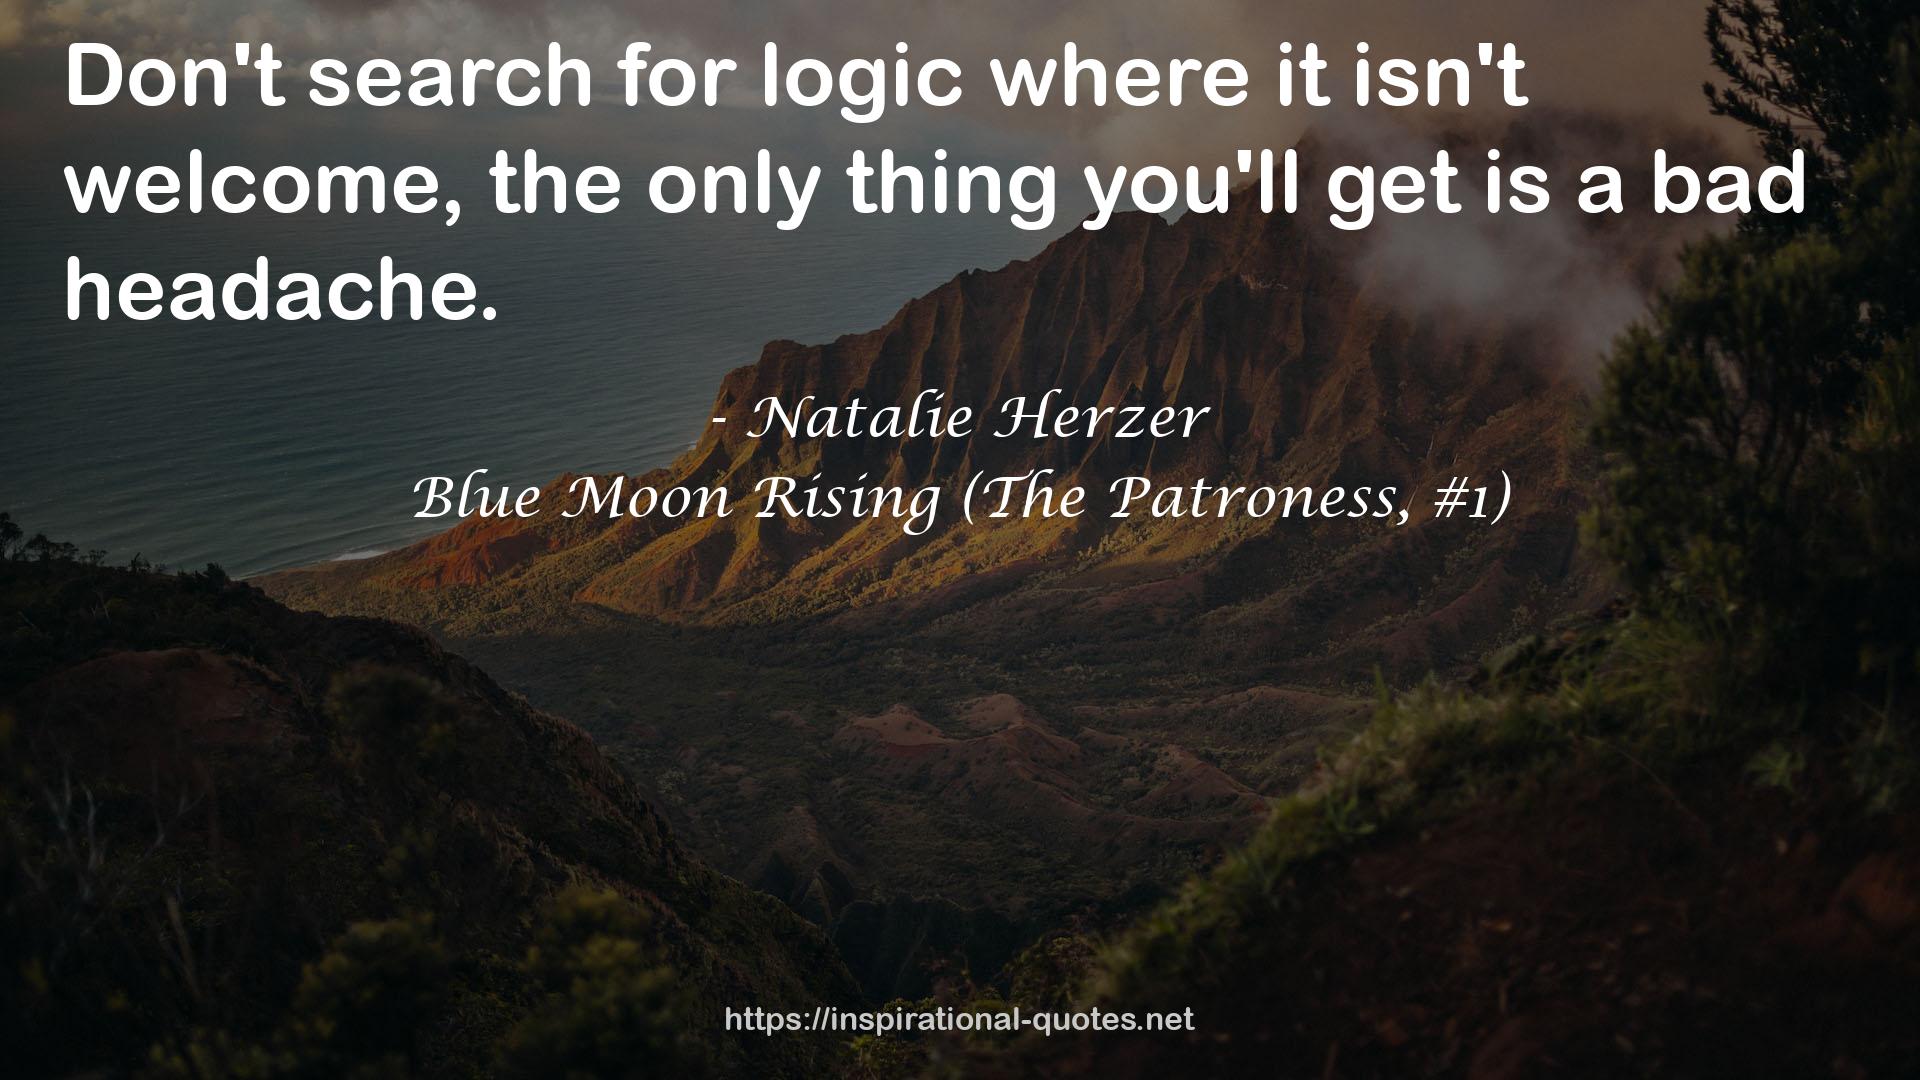 Blue Moon Rising (The Patroness, #1) QUOTES